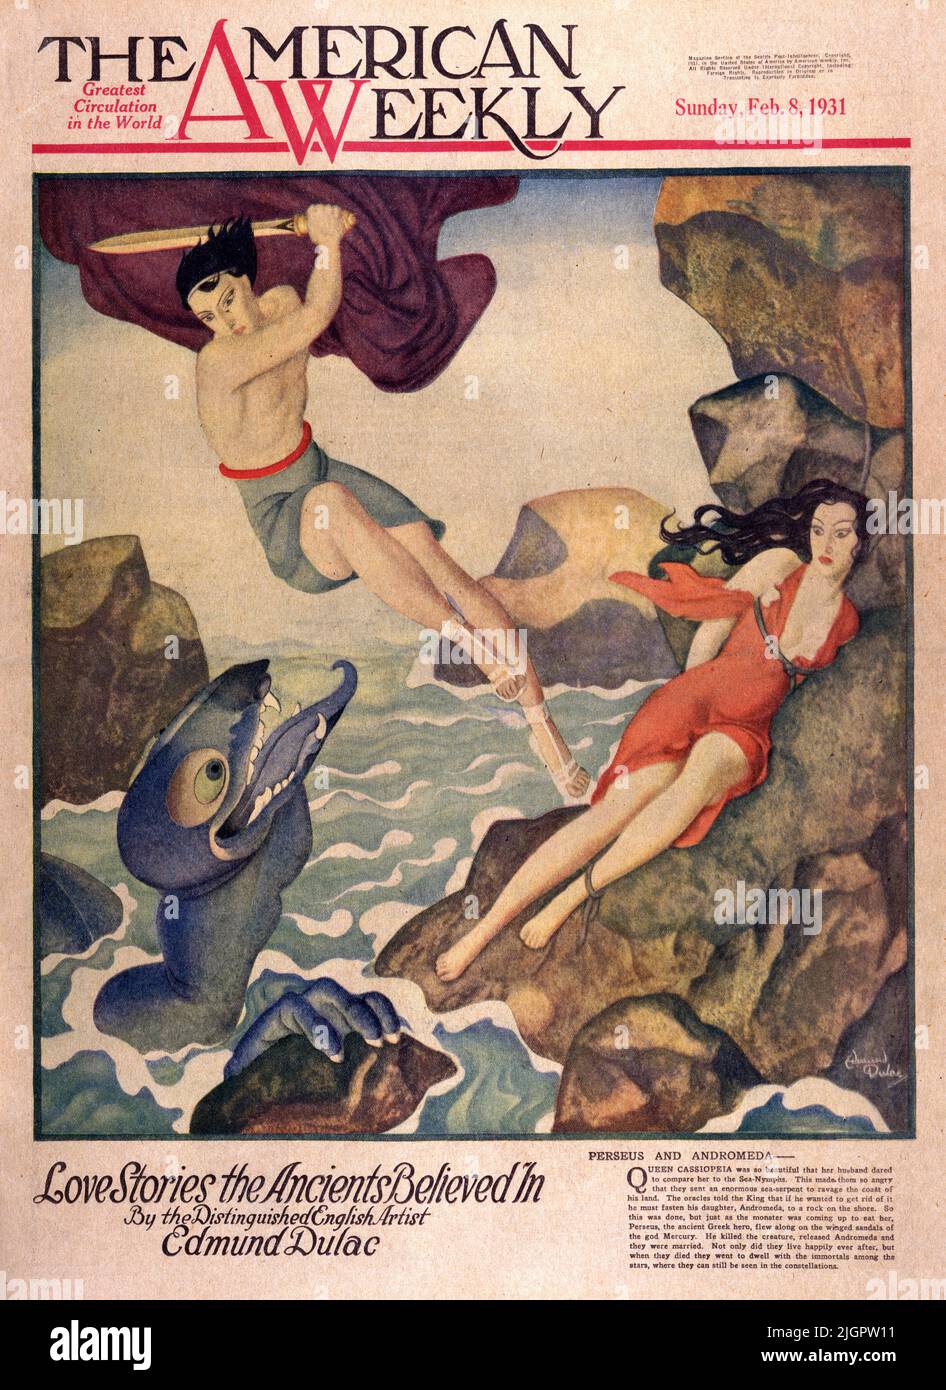 'Perseus and Andromeda' published on Feb.8,1931 in the American Weekly magazine painted by Edmund Dulac. Queen Cassiopeia was so beautiful that her husband dared to compare her to the Sea Nymphs. This made them so angry that they sent an enormous sea serpent to ravage the coast of his land. The oracles trold the King that if he wanted to get rid of it, he must fasten his daughter, Andromeda, to a rock on the shore. So this was done, but just as the monster was coming up to eat her. Perseus, the ancient Greek hero, flew along on the winged sandals of the god Mercury. He killed the creature. Stock Photo